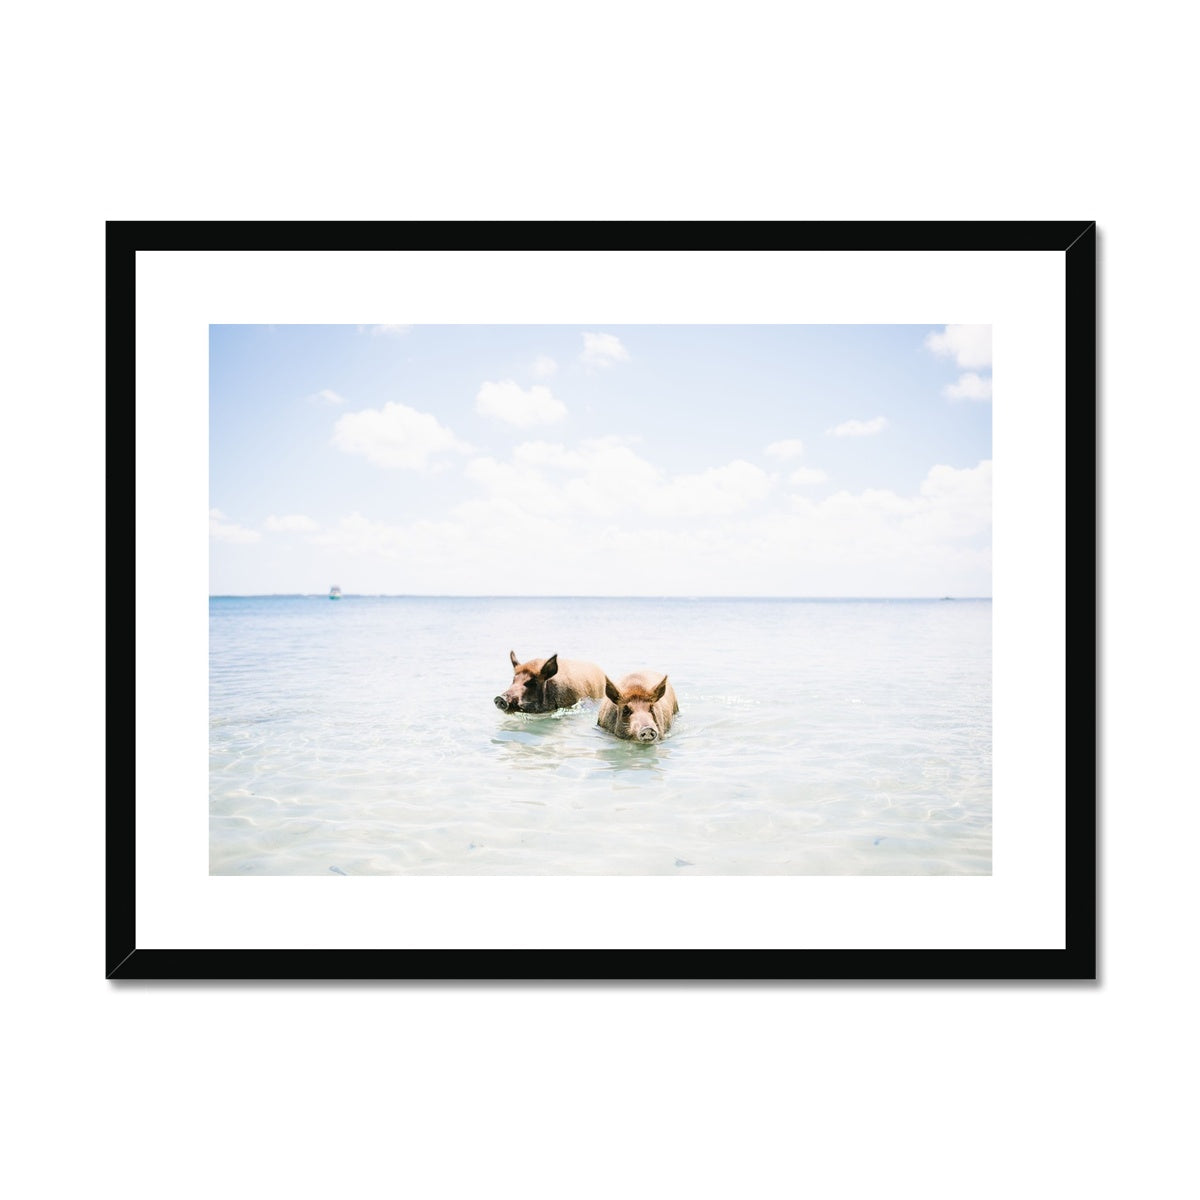 SWIMMING PIGS Framed & Mounted Print